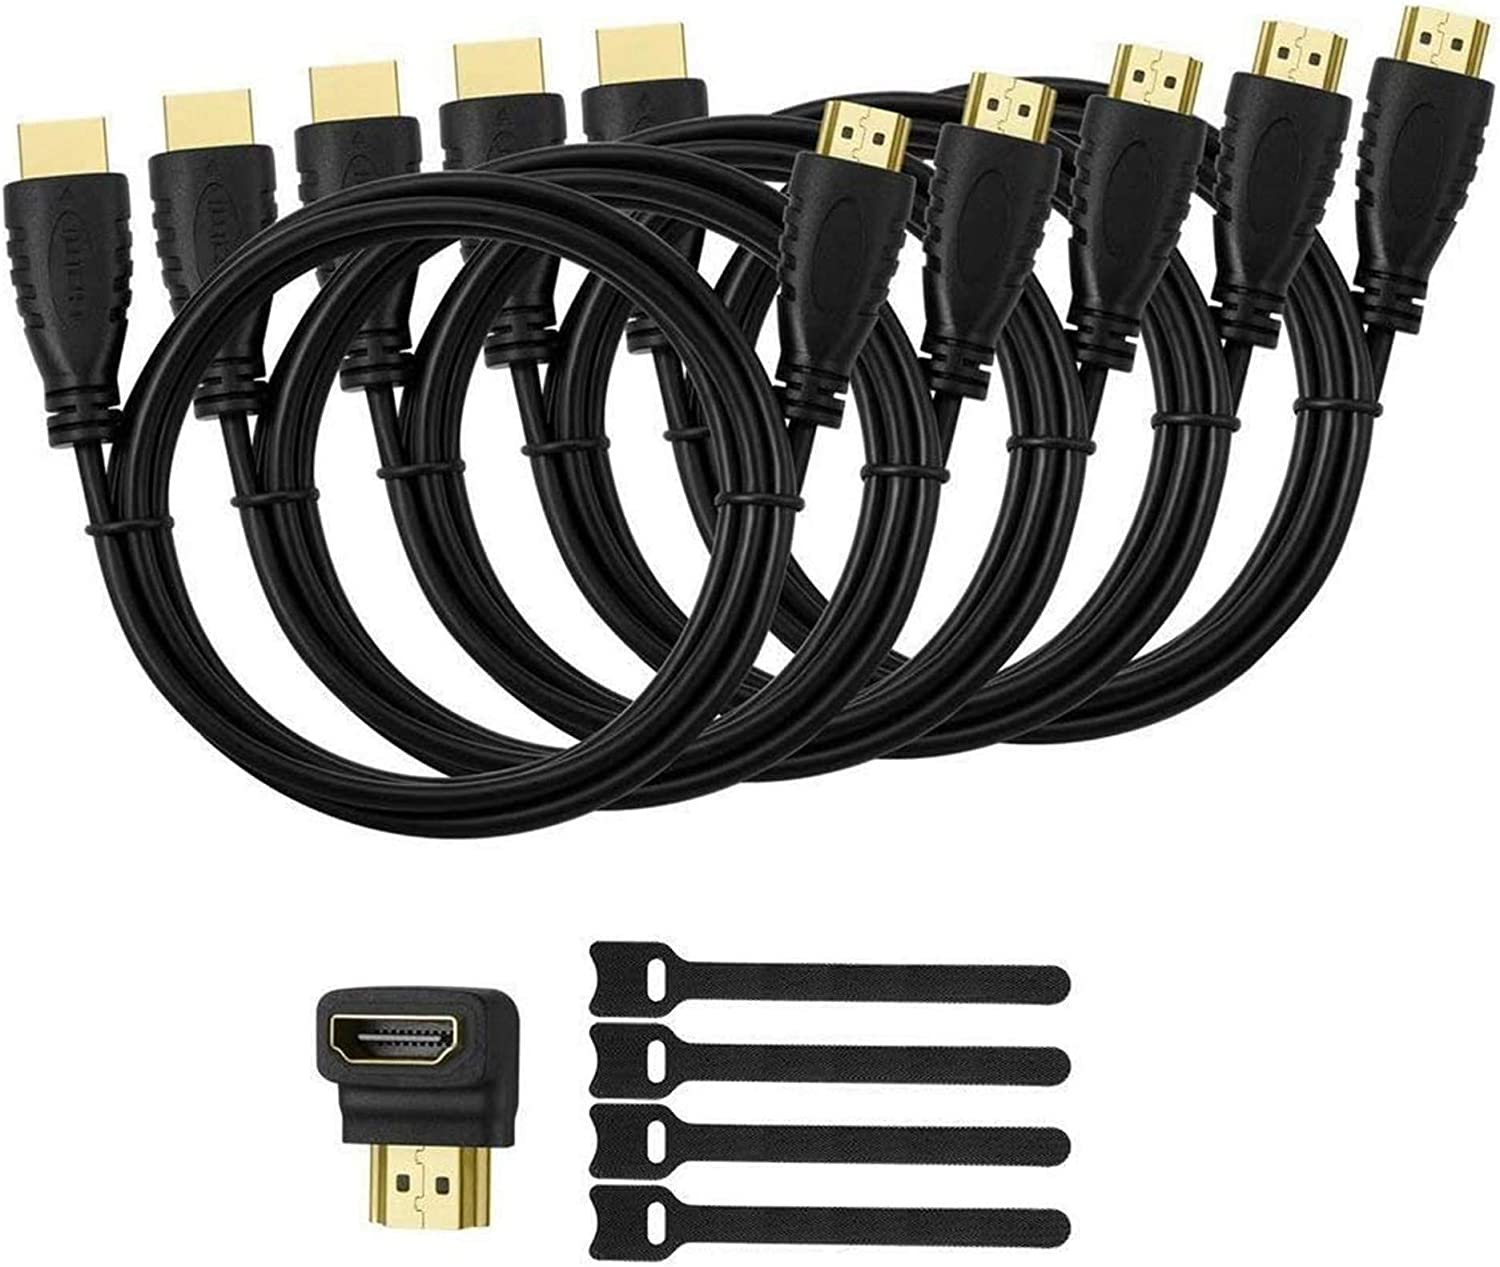 5 Pack High-Speed HDMI Cables-6ft with 90 Degree Adapter – Just $19.99 at Amazon